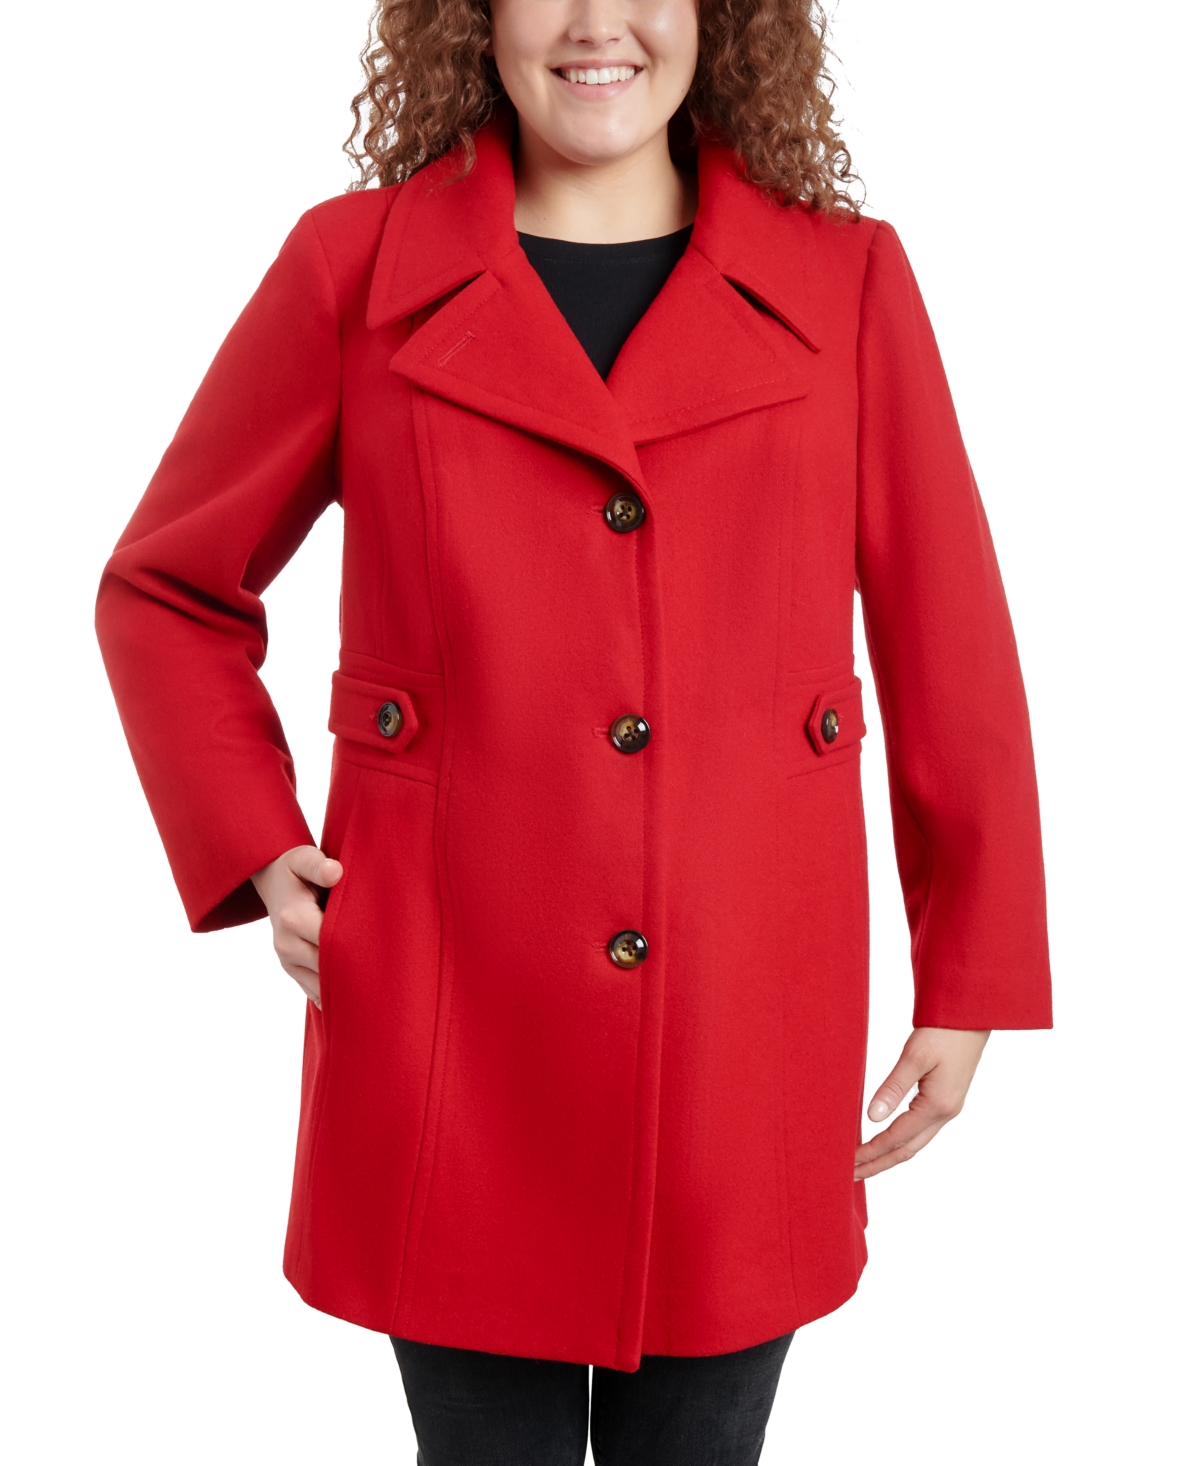 ANNE KLEIN WOMEN'S PLUS SIZE SINGLE-BREASTED NOTCHED-COLLAR PEACOAT, CREATED FOR MACY'S